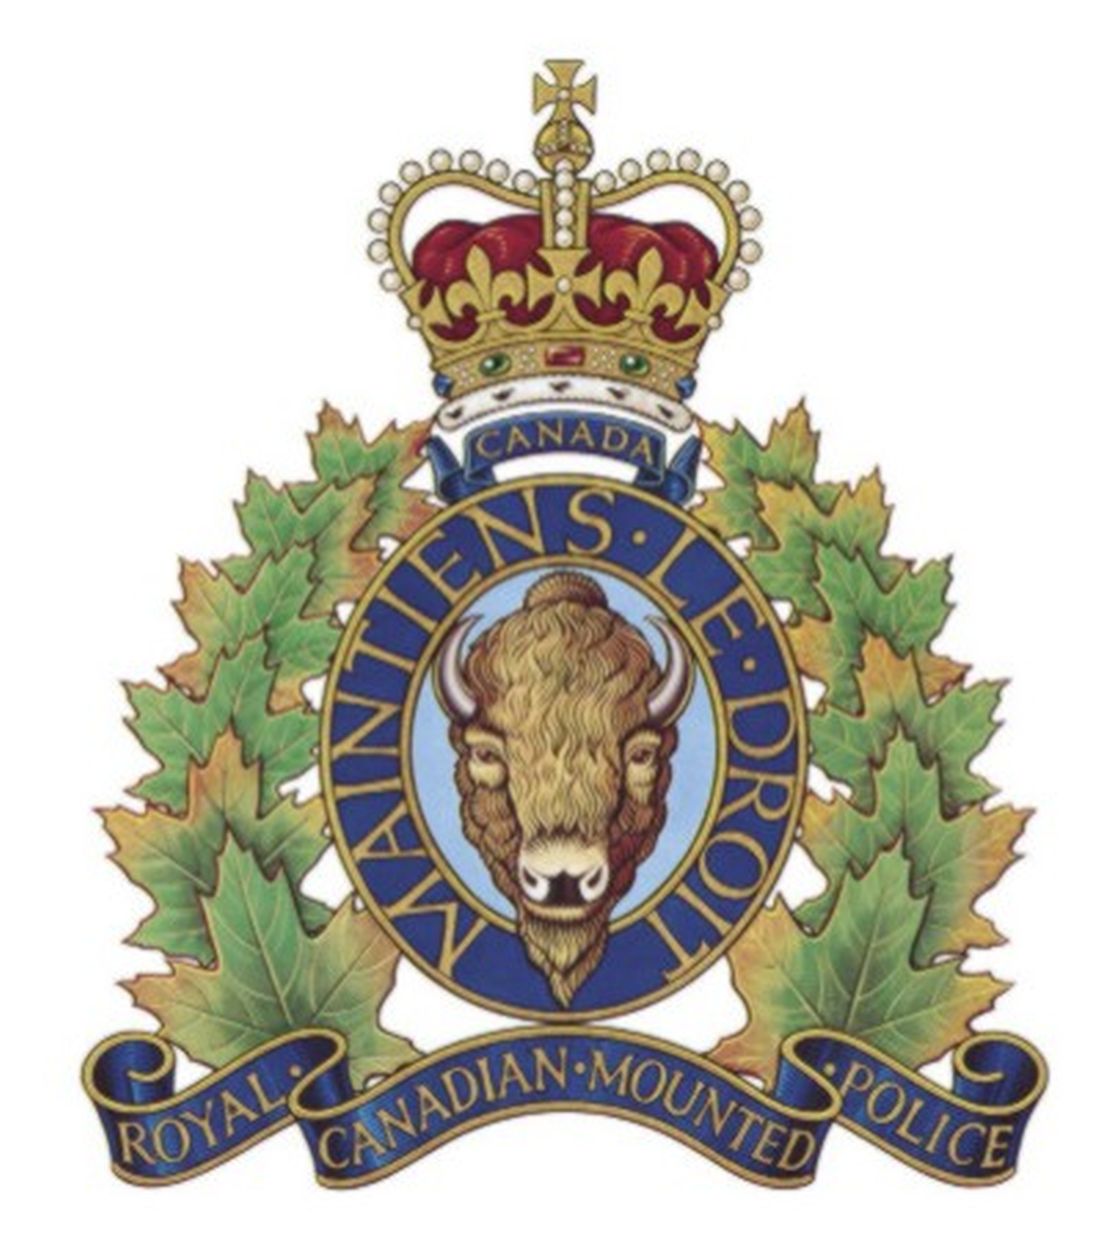 A 30-year-old Fort McMurray man is facing sexual assault charges.